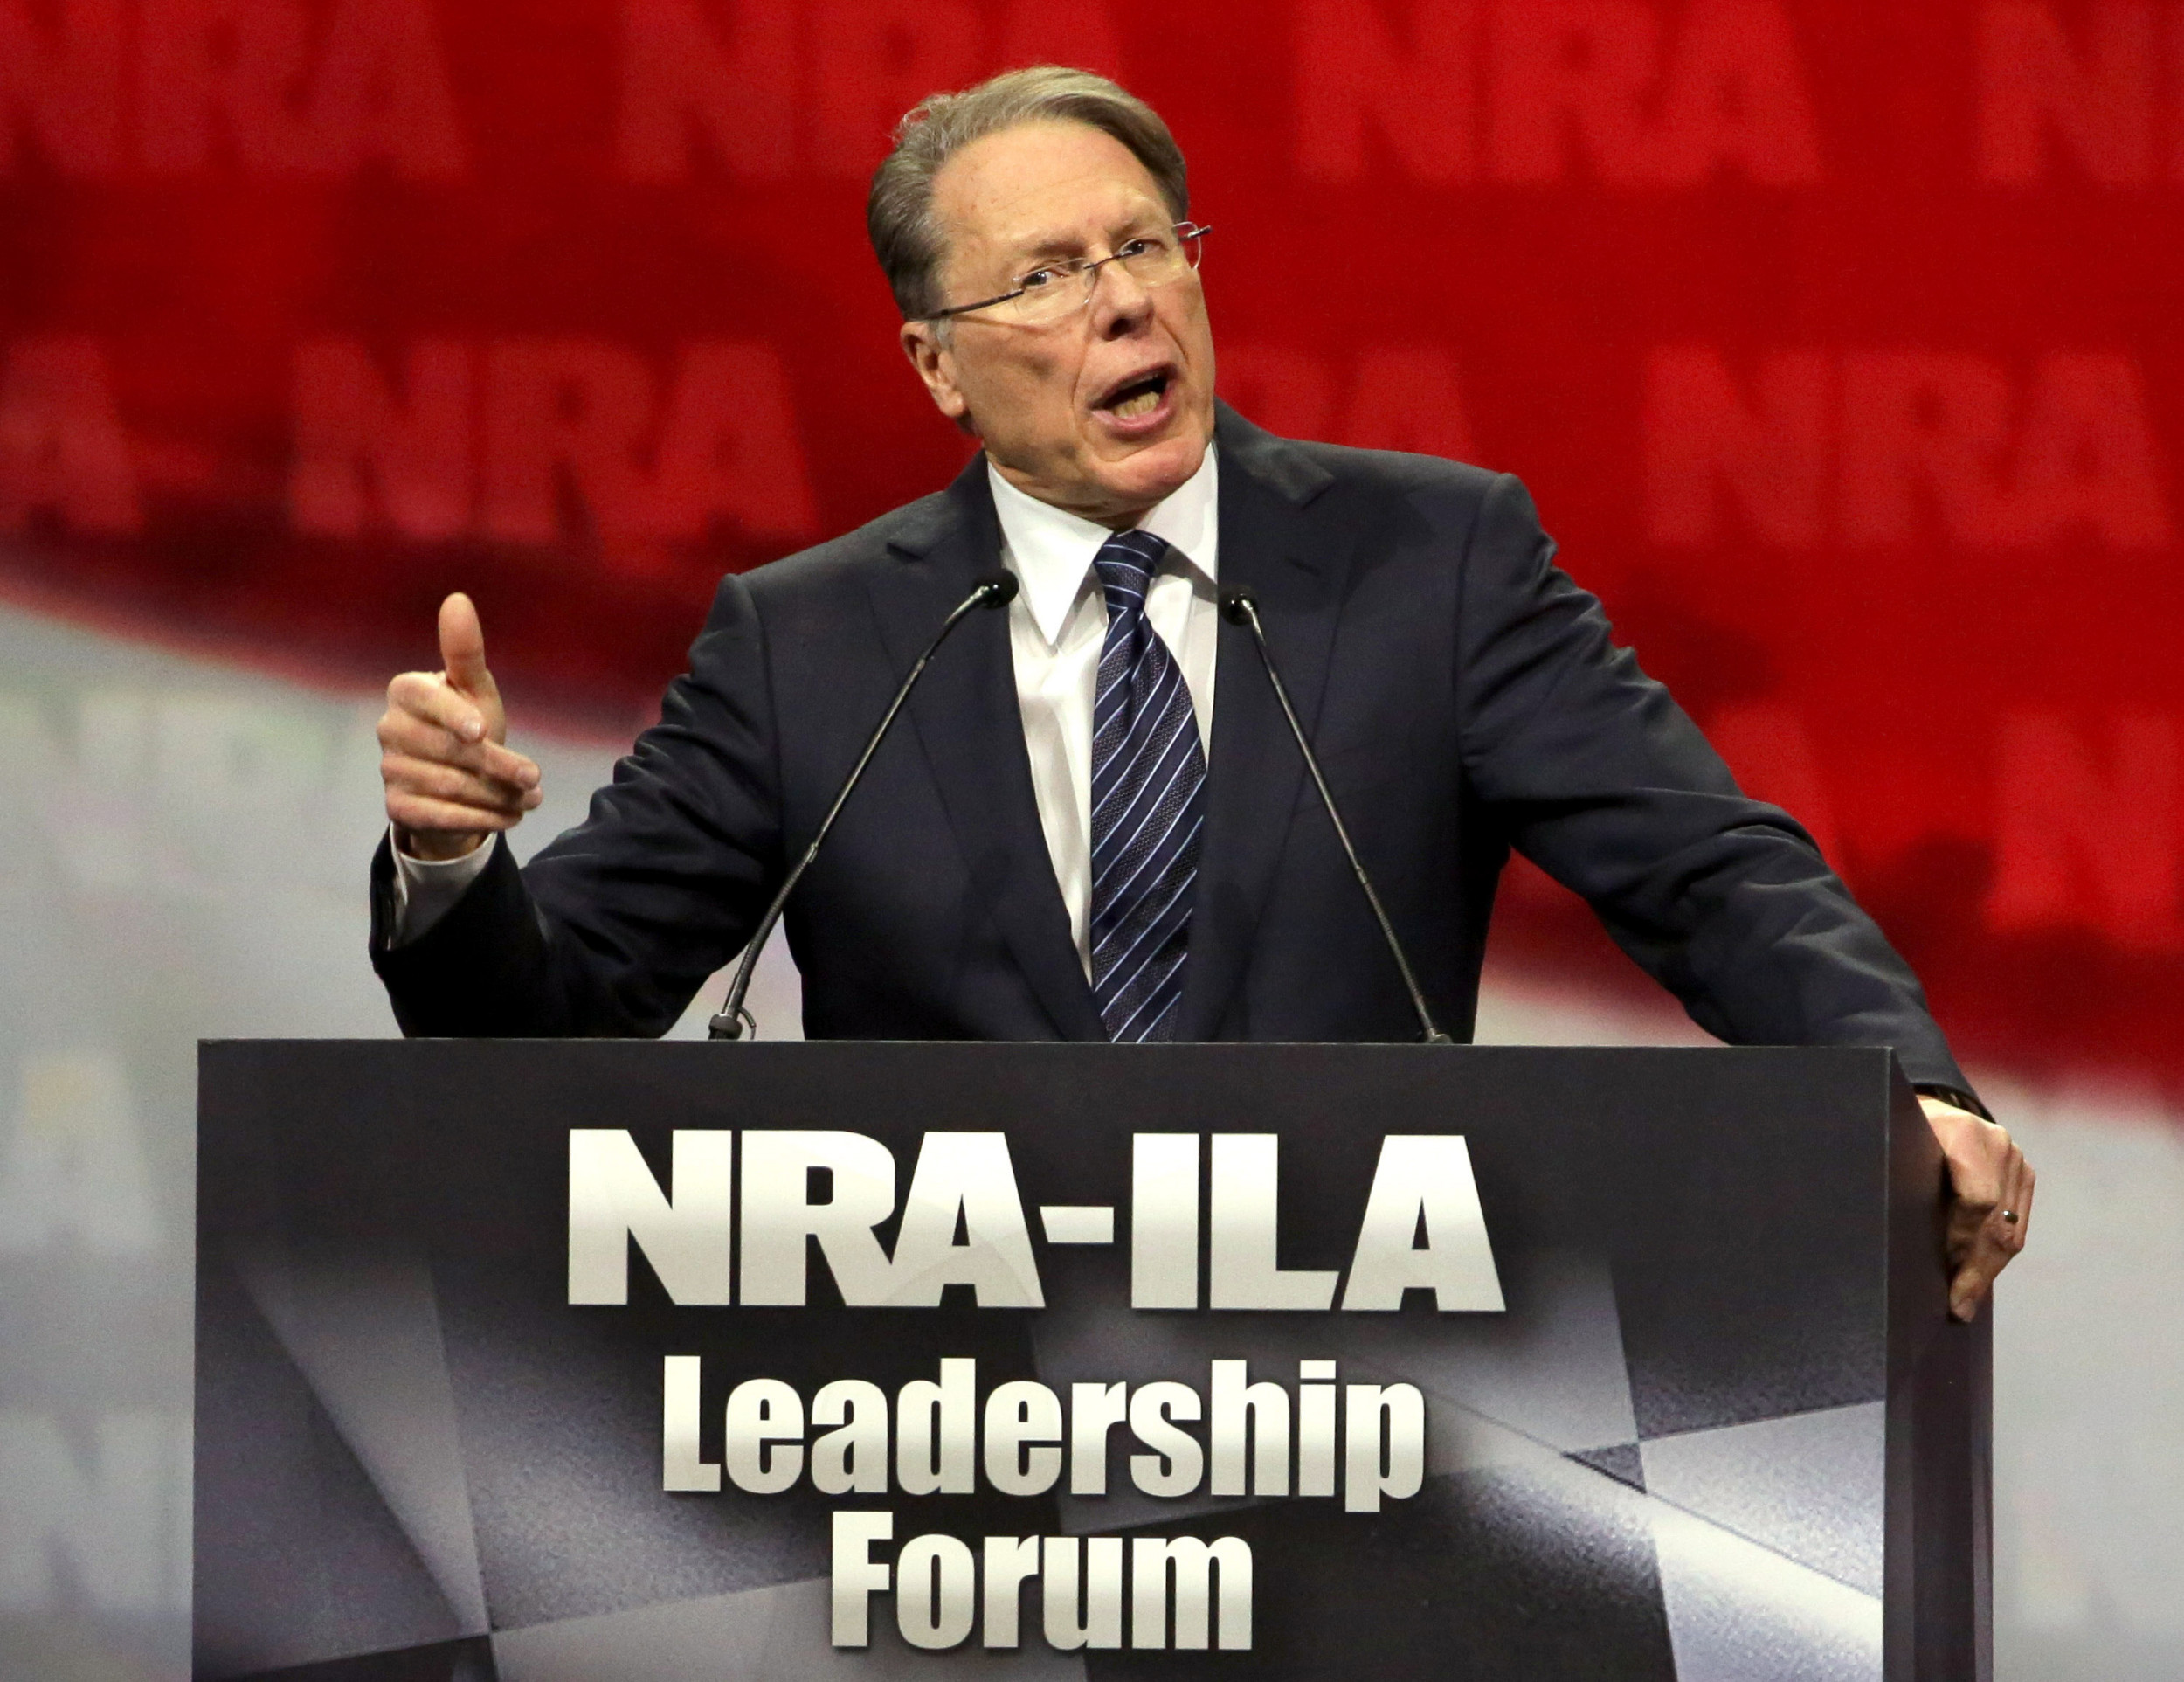 New Senate Report Alleges NRA Planned Moscow Trip, Brokered Ties With